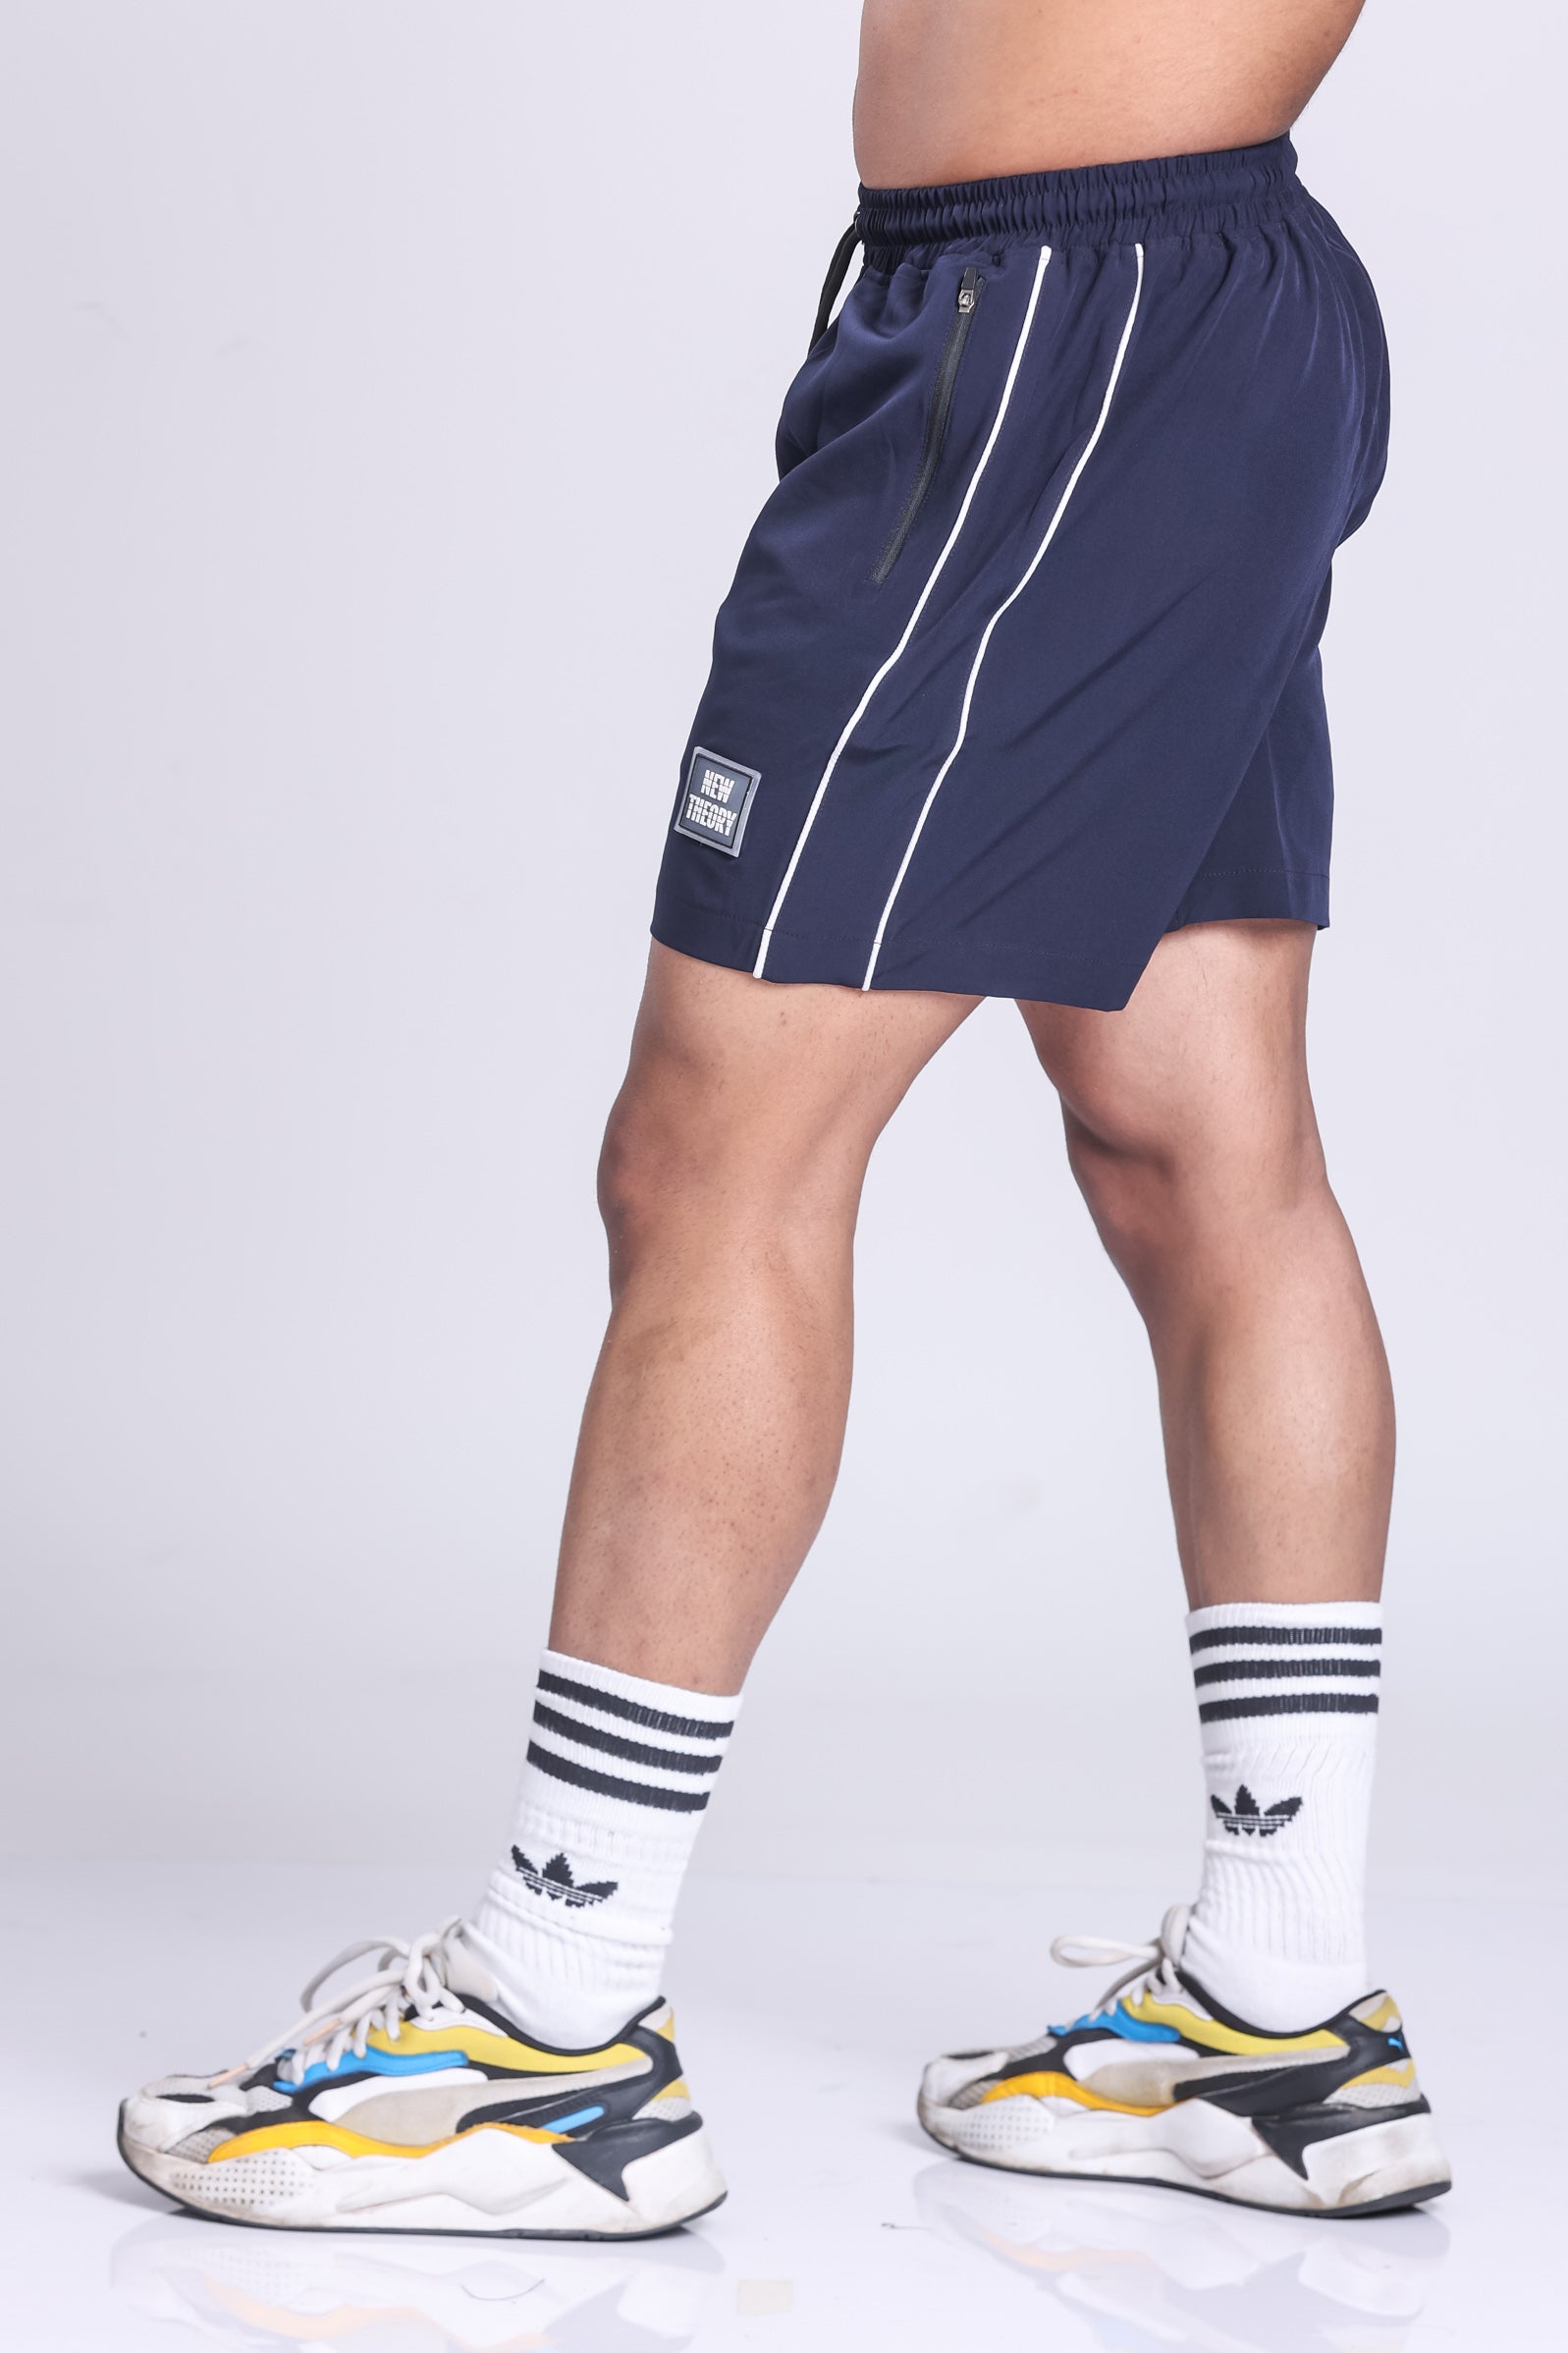 Essential Performance Shorts- Navy